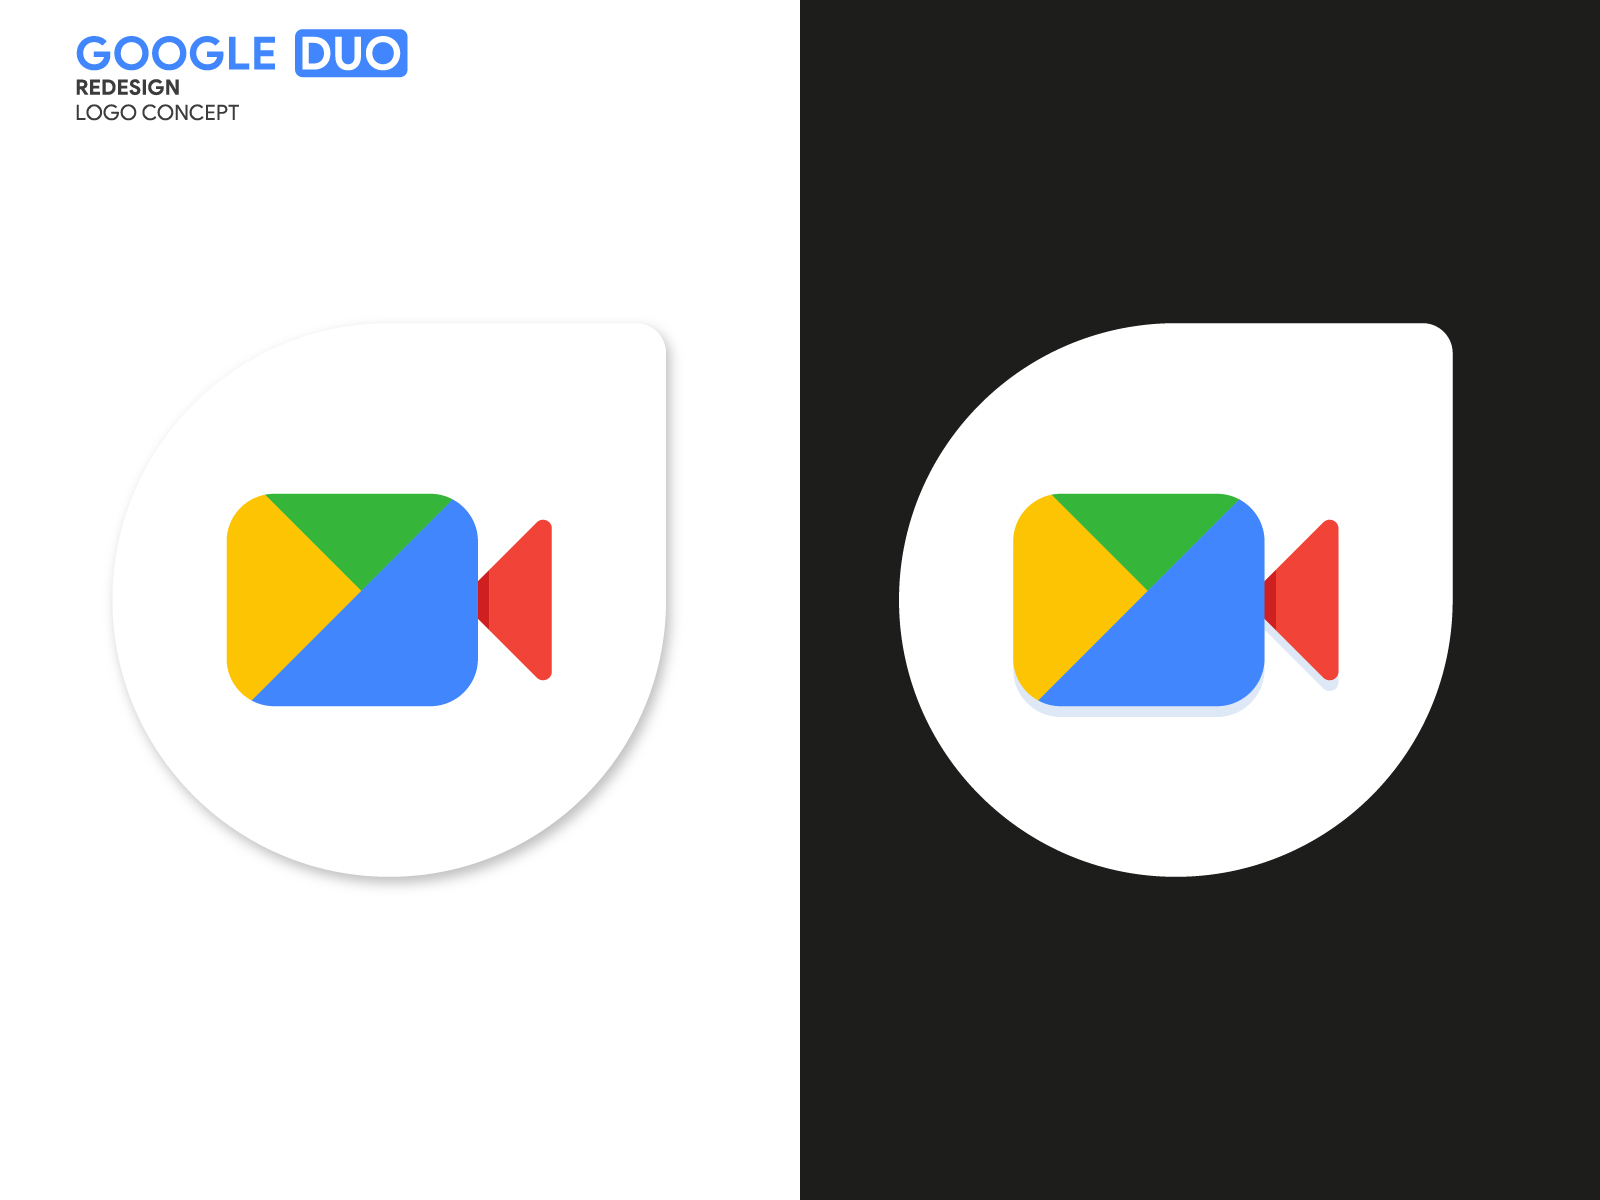 Google Duo REDESIGN logo CONCEPT by Shaheen Ahmed on Dribbble